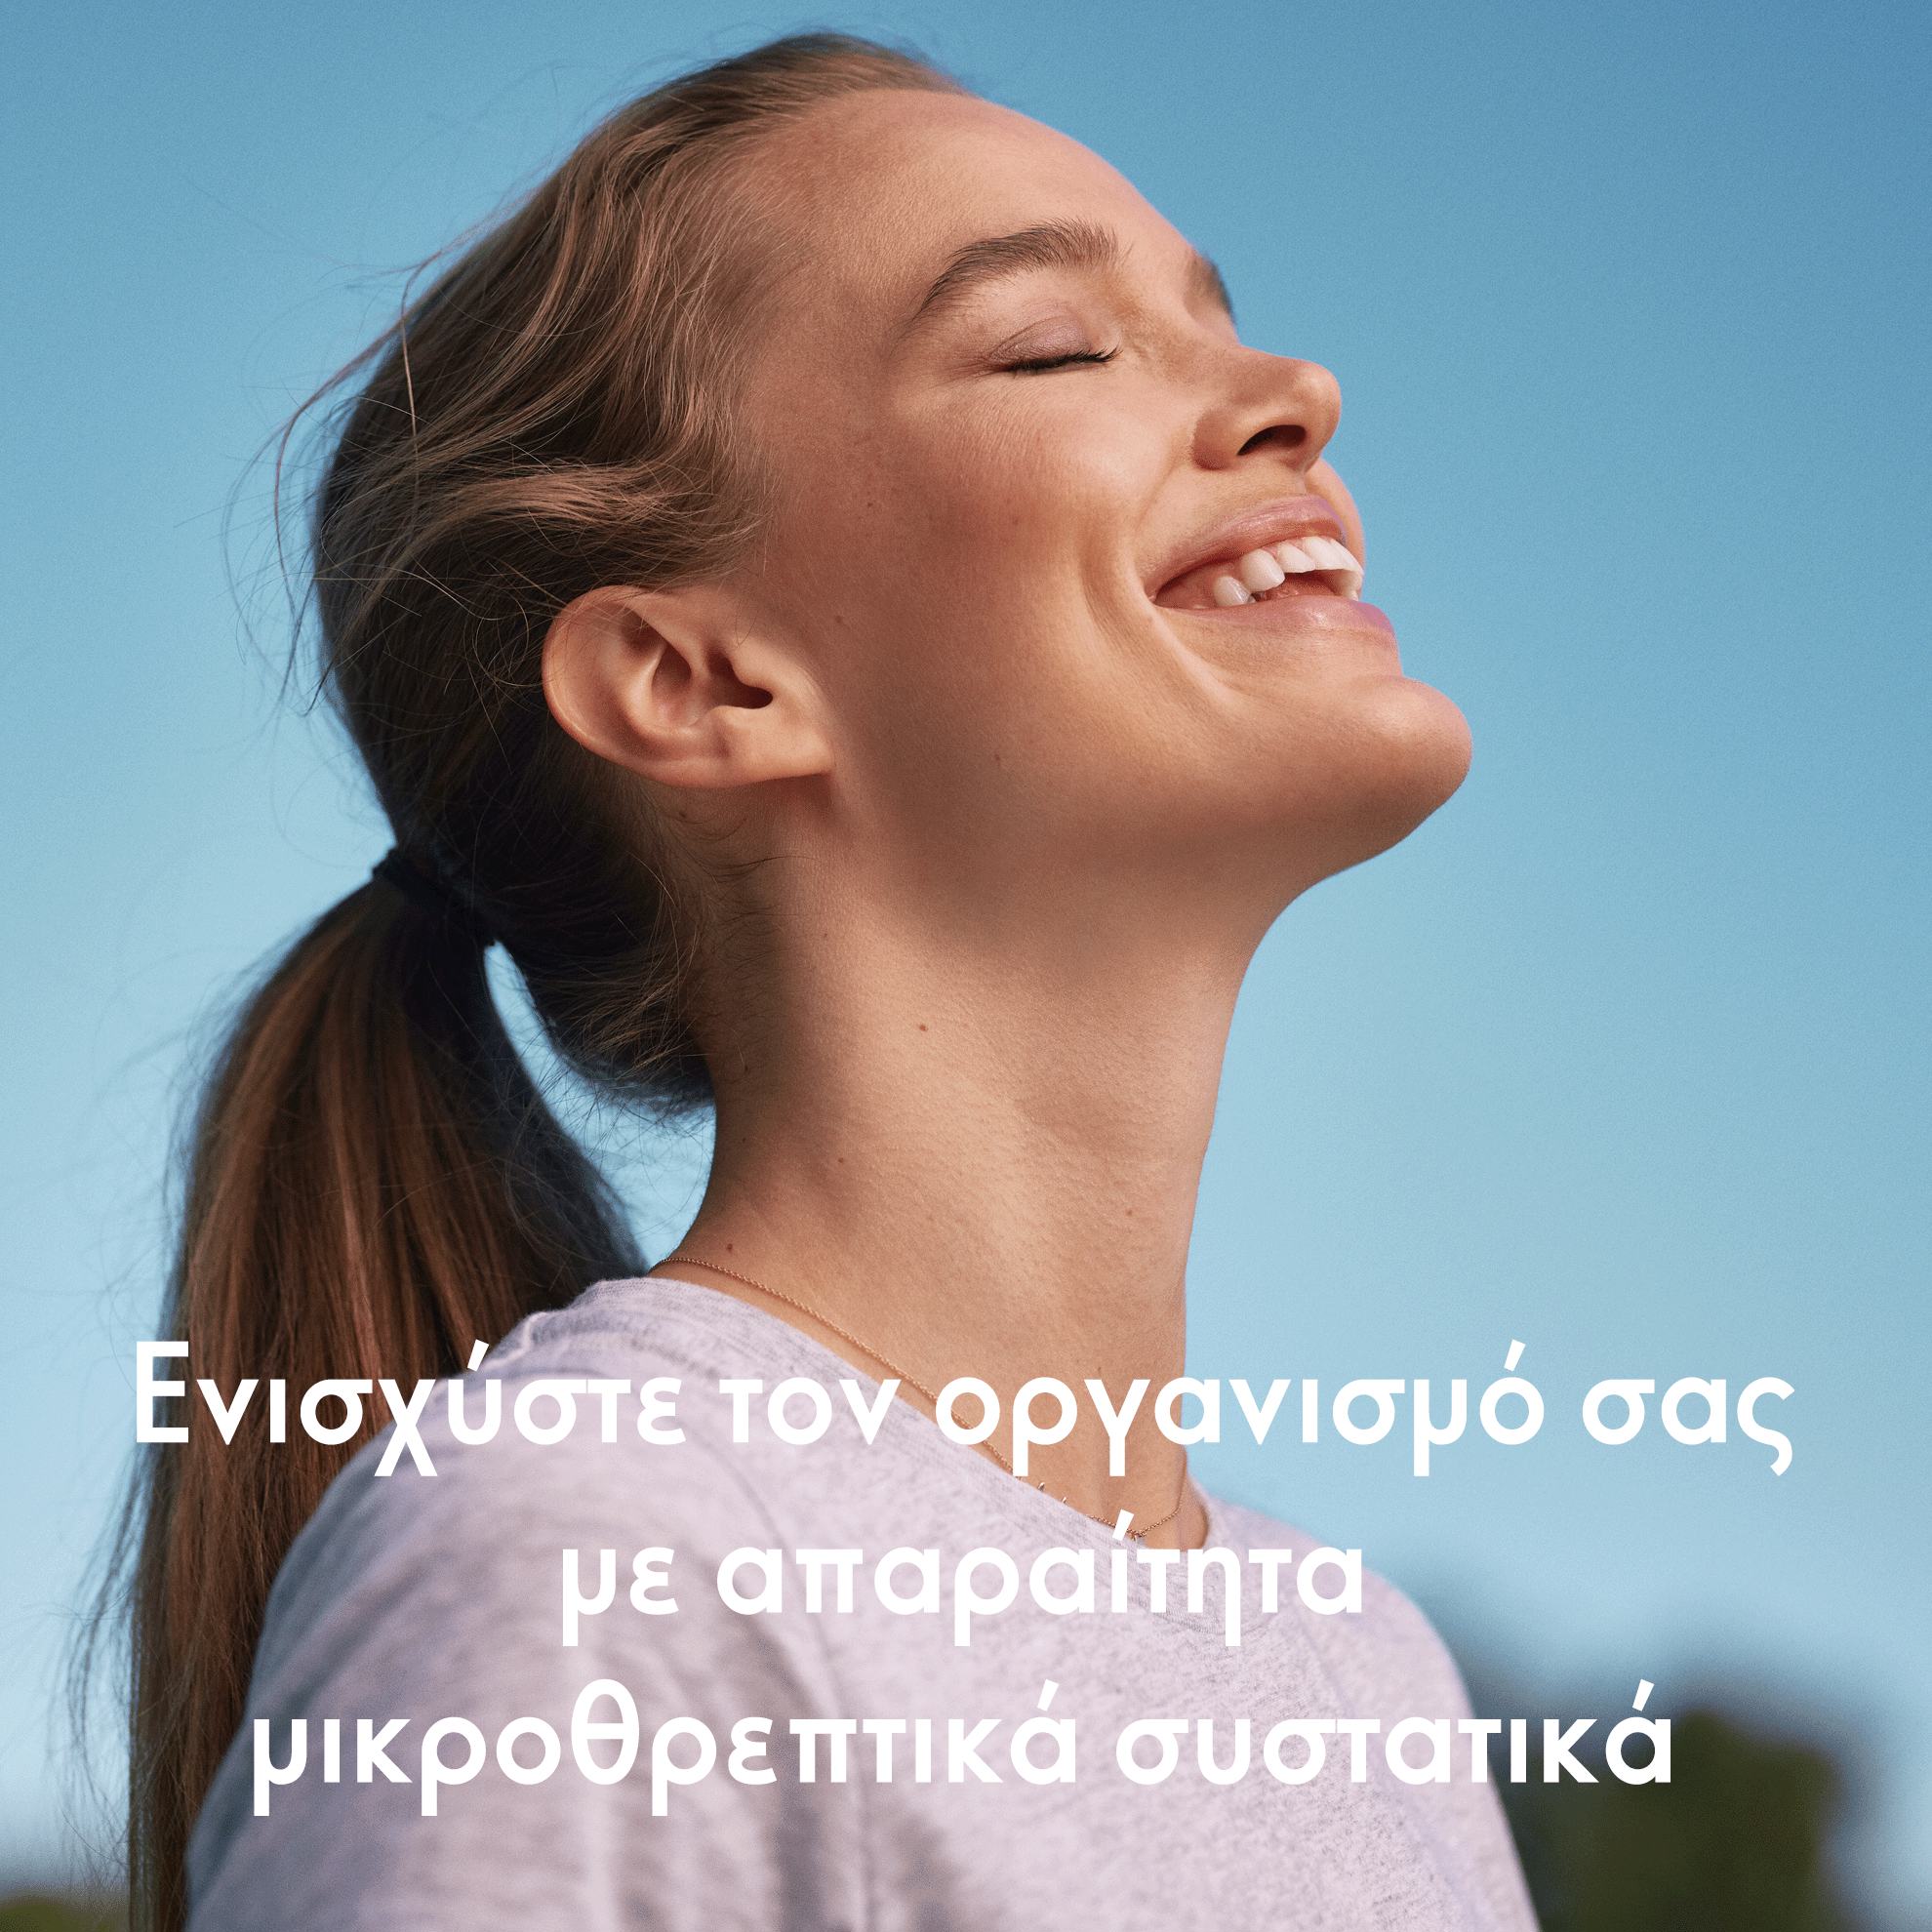 https://media-cdn.oriflame.com/productImage?externalMediaId=product-management-media%2fProducts%2f38559%2fGR%2f38559_5.png&id=18142479&version=2